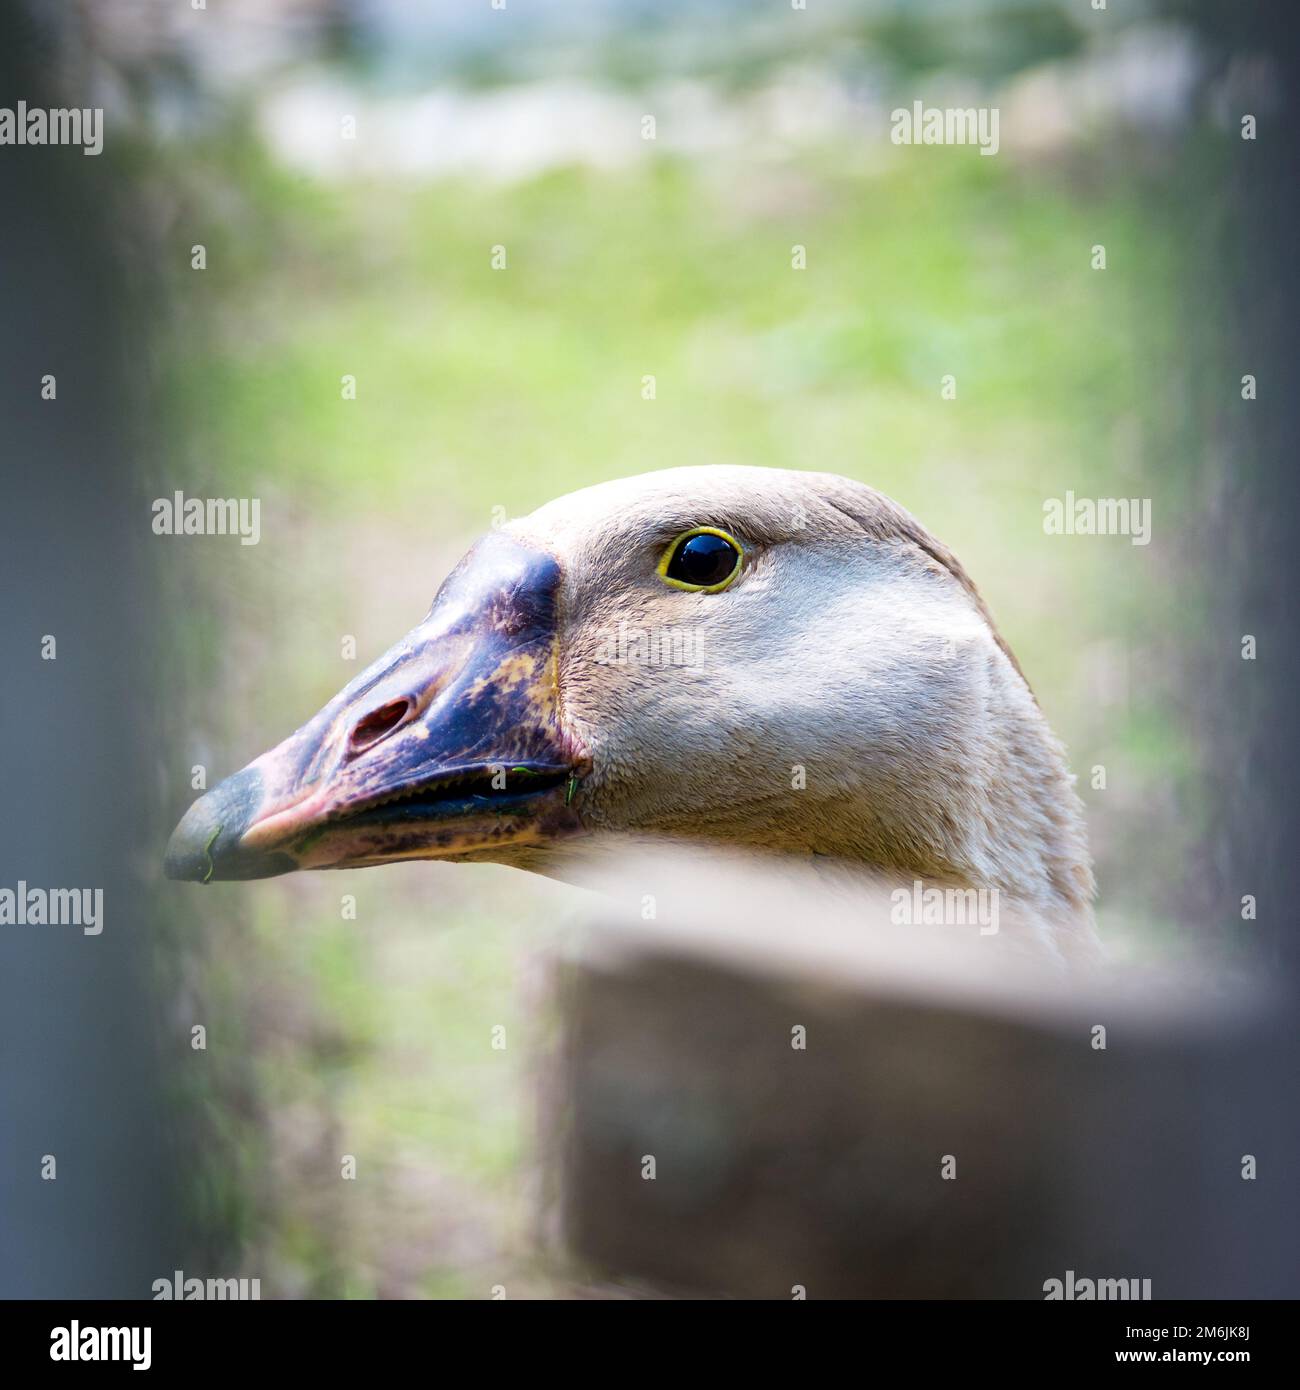 Closeup goose looking through the fence of the outdoor farm area Stock Photo